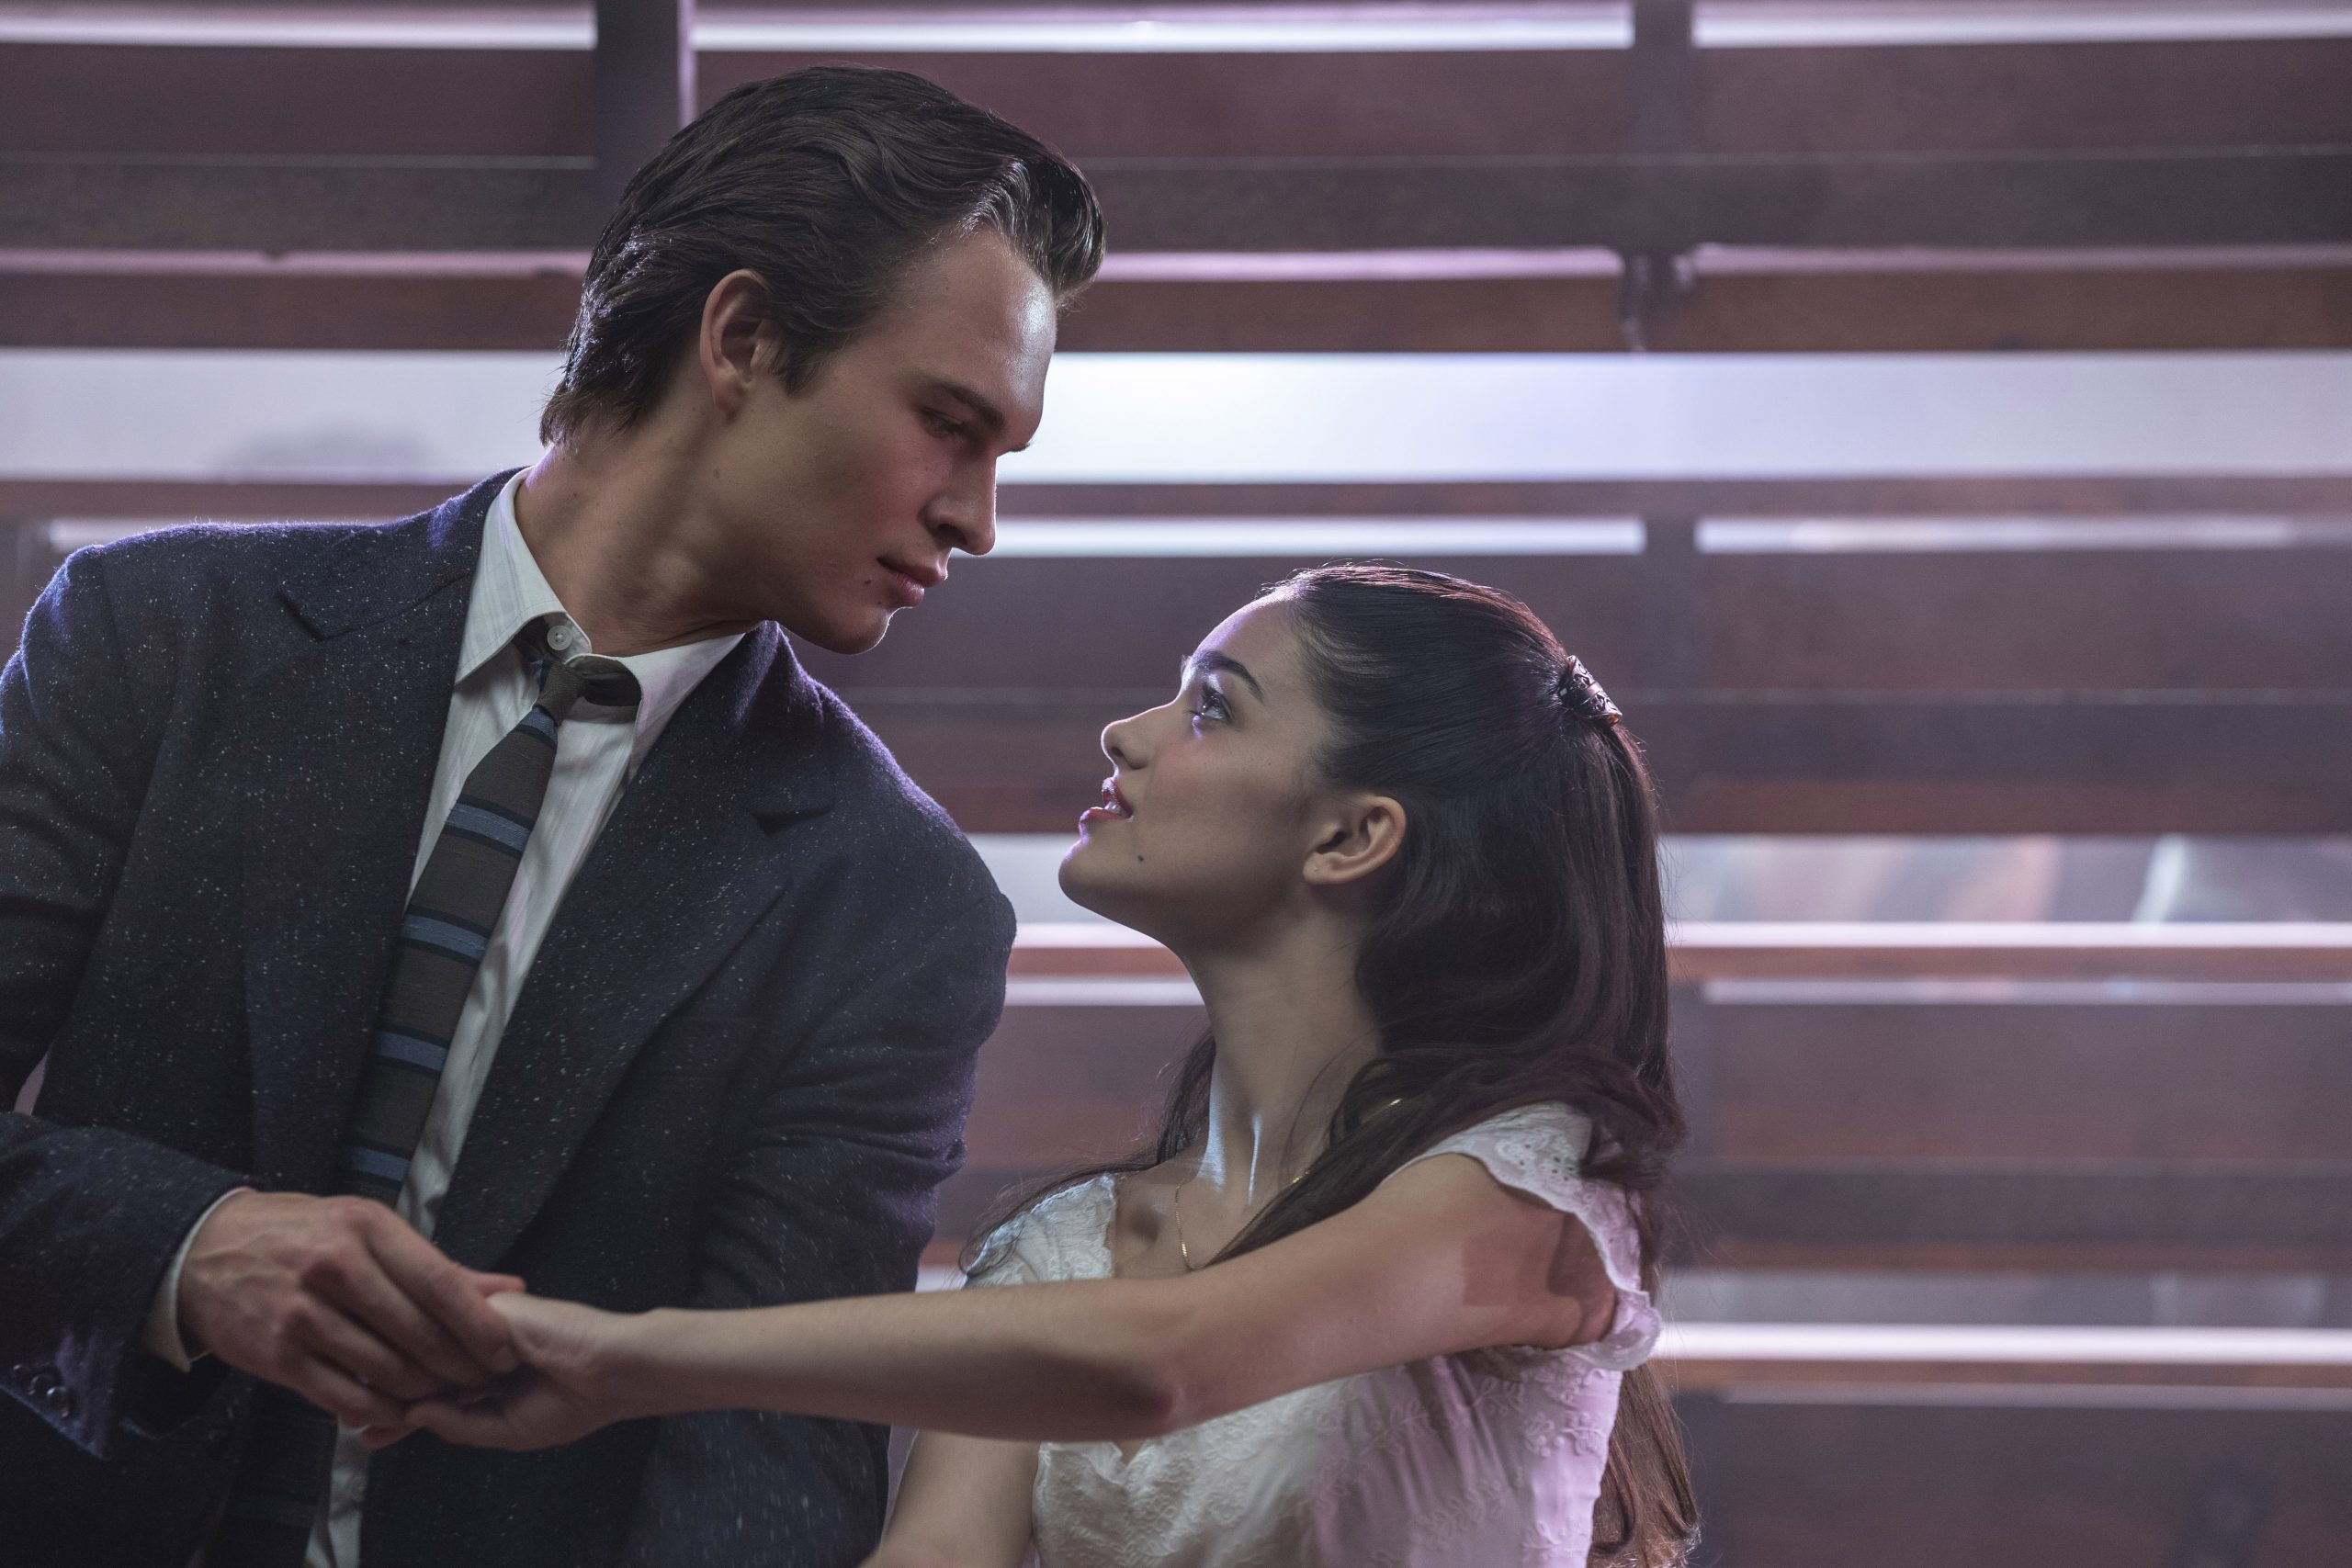 Box Office: West Side Story, Nightmare Alley Struggle